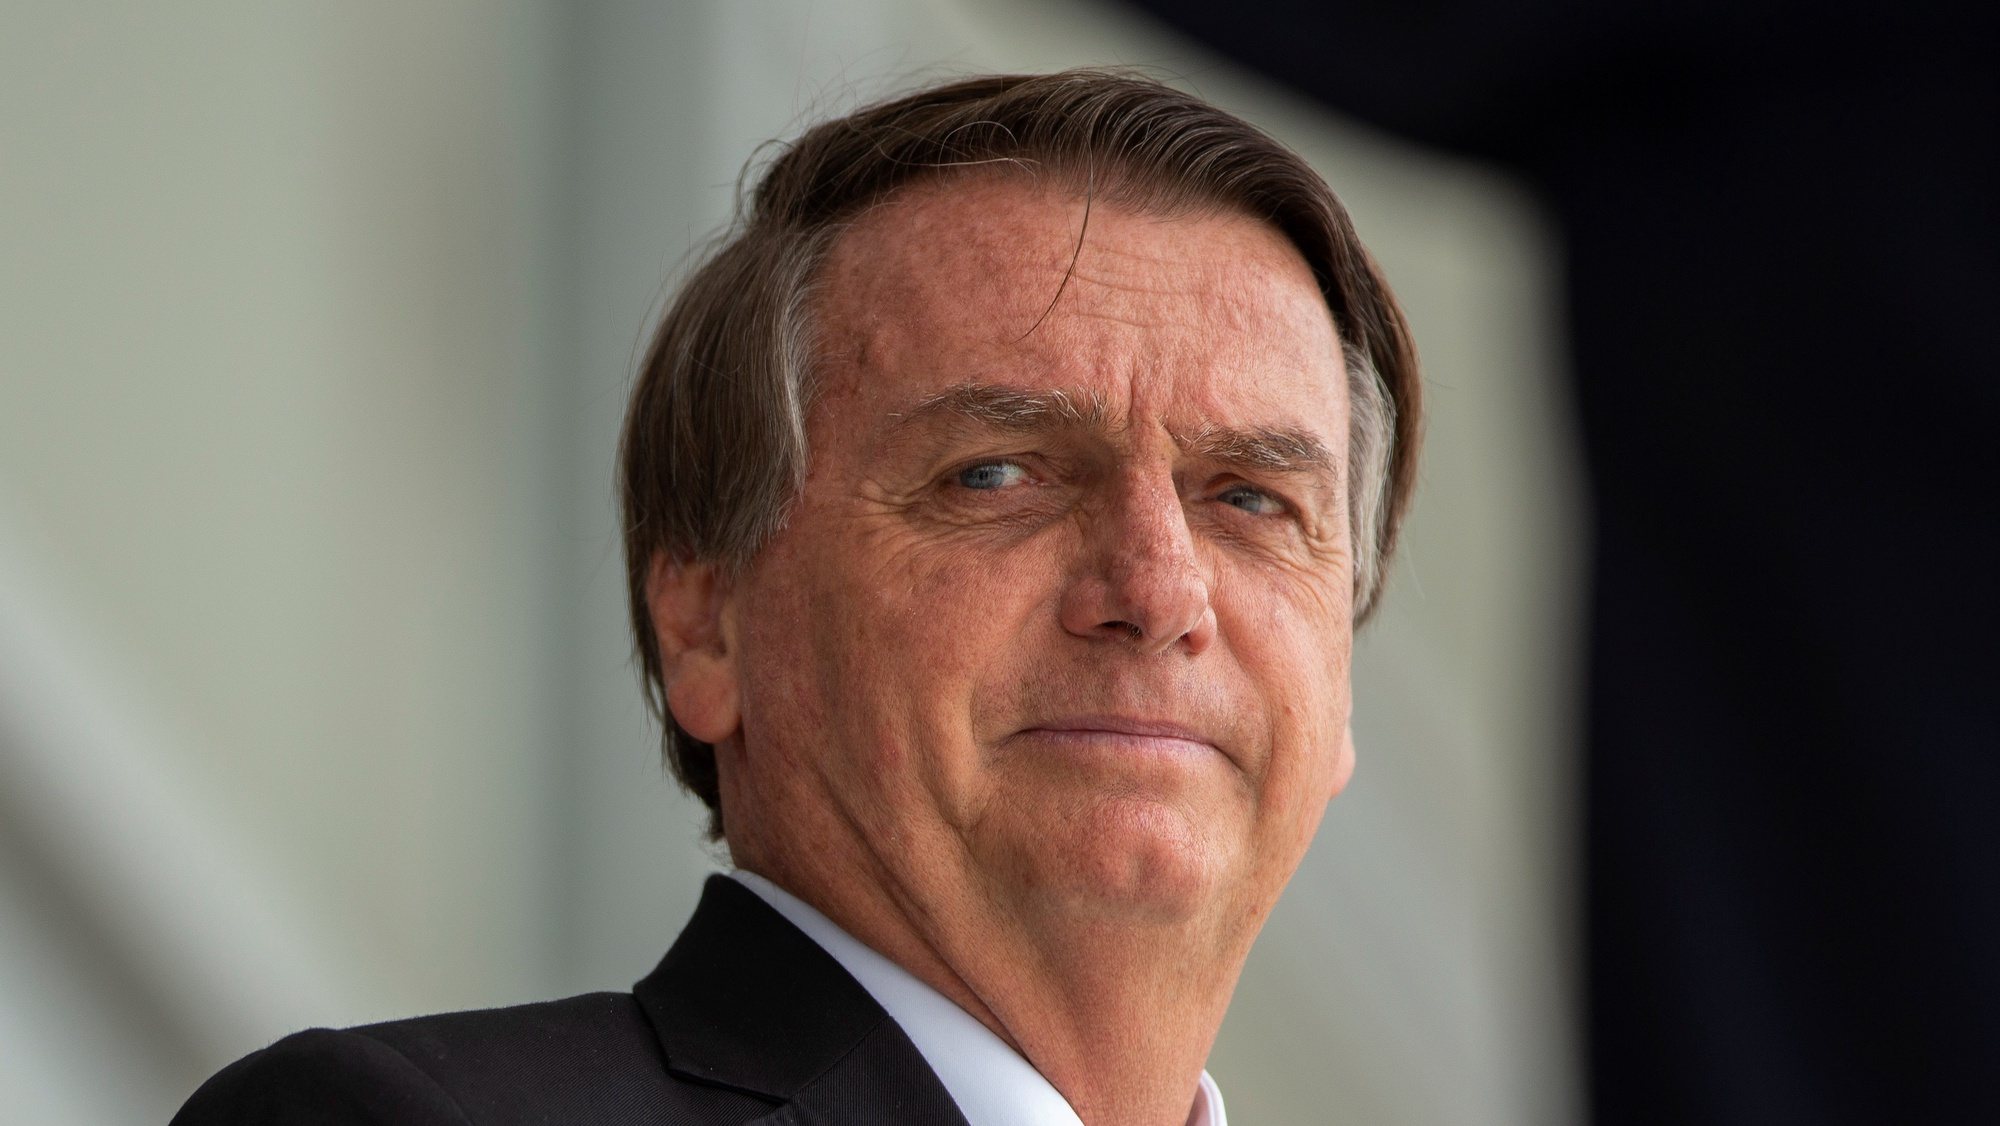 epa09645247 The president of Brazil, Jair Bolsonaro, participates in the ceremony of the Great Replacement of the Presidential Guard, at the Palacio do Planalto in the city of Brasilia, Brazil, 16 December 2021.  EPA/Joedson Alves